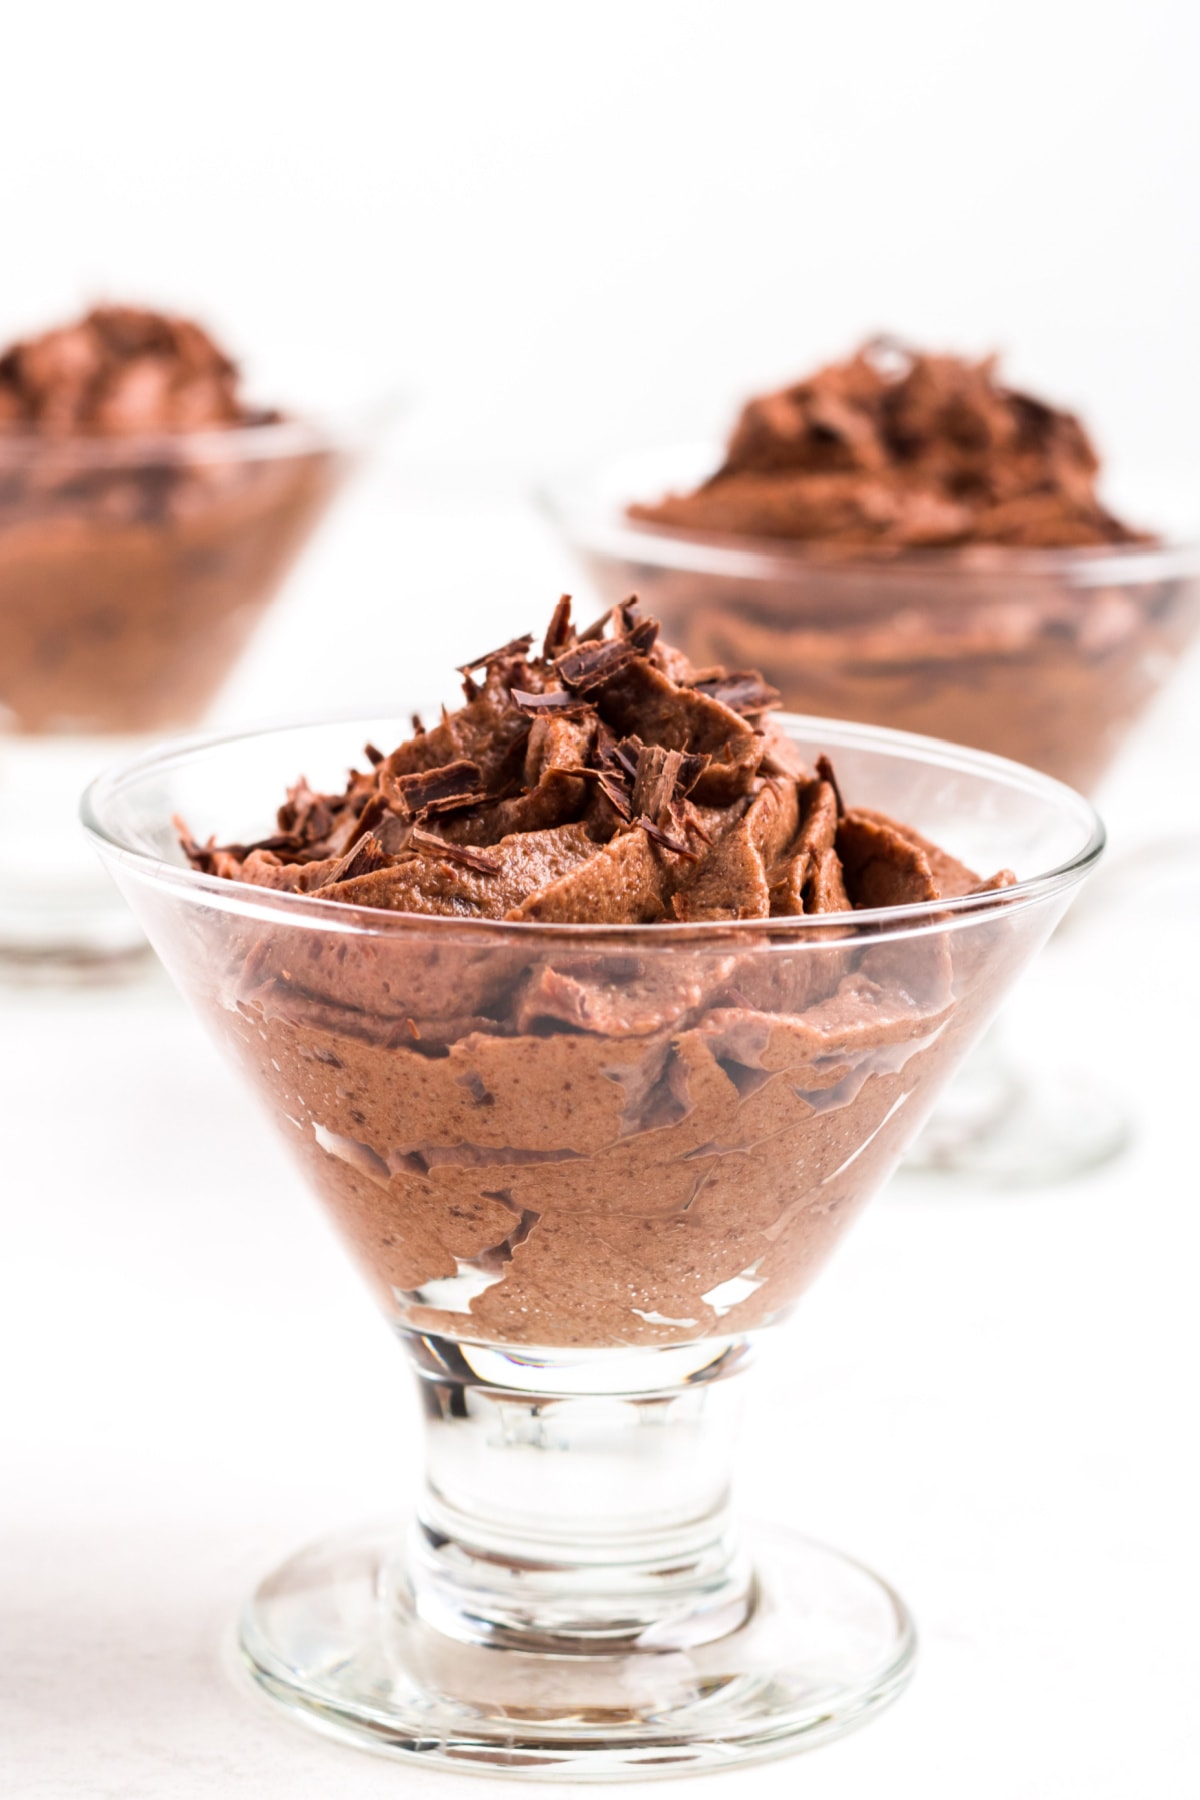 Chocolate mouse in glass dessert bowl